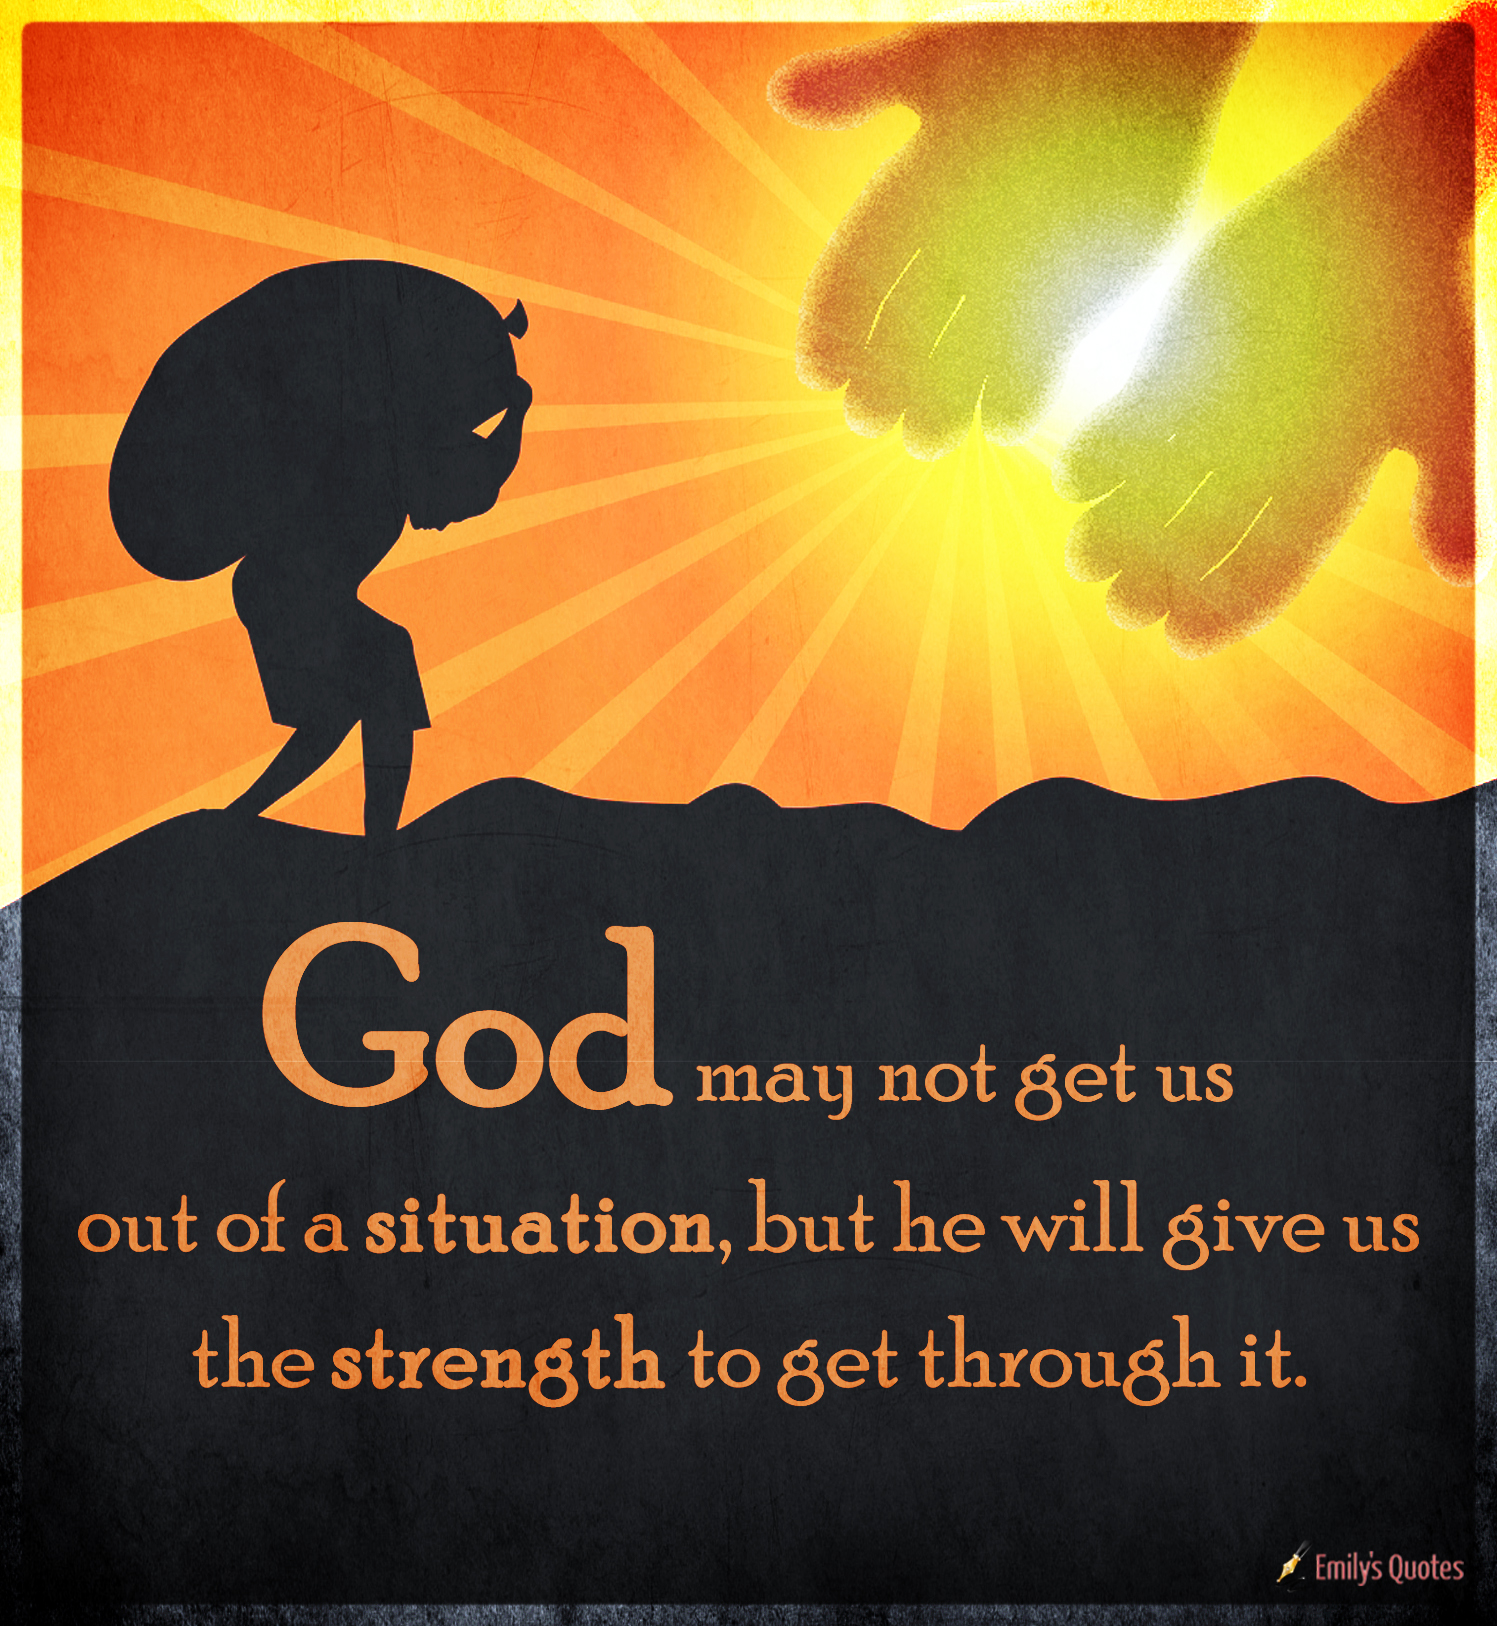 God may not get us out of a situation, but he will give us